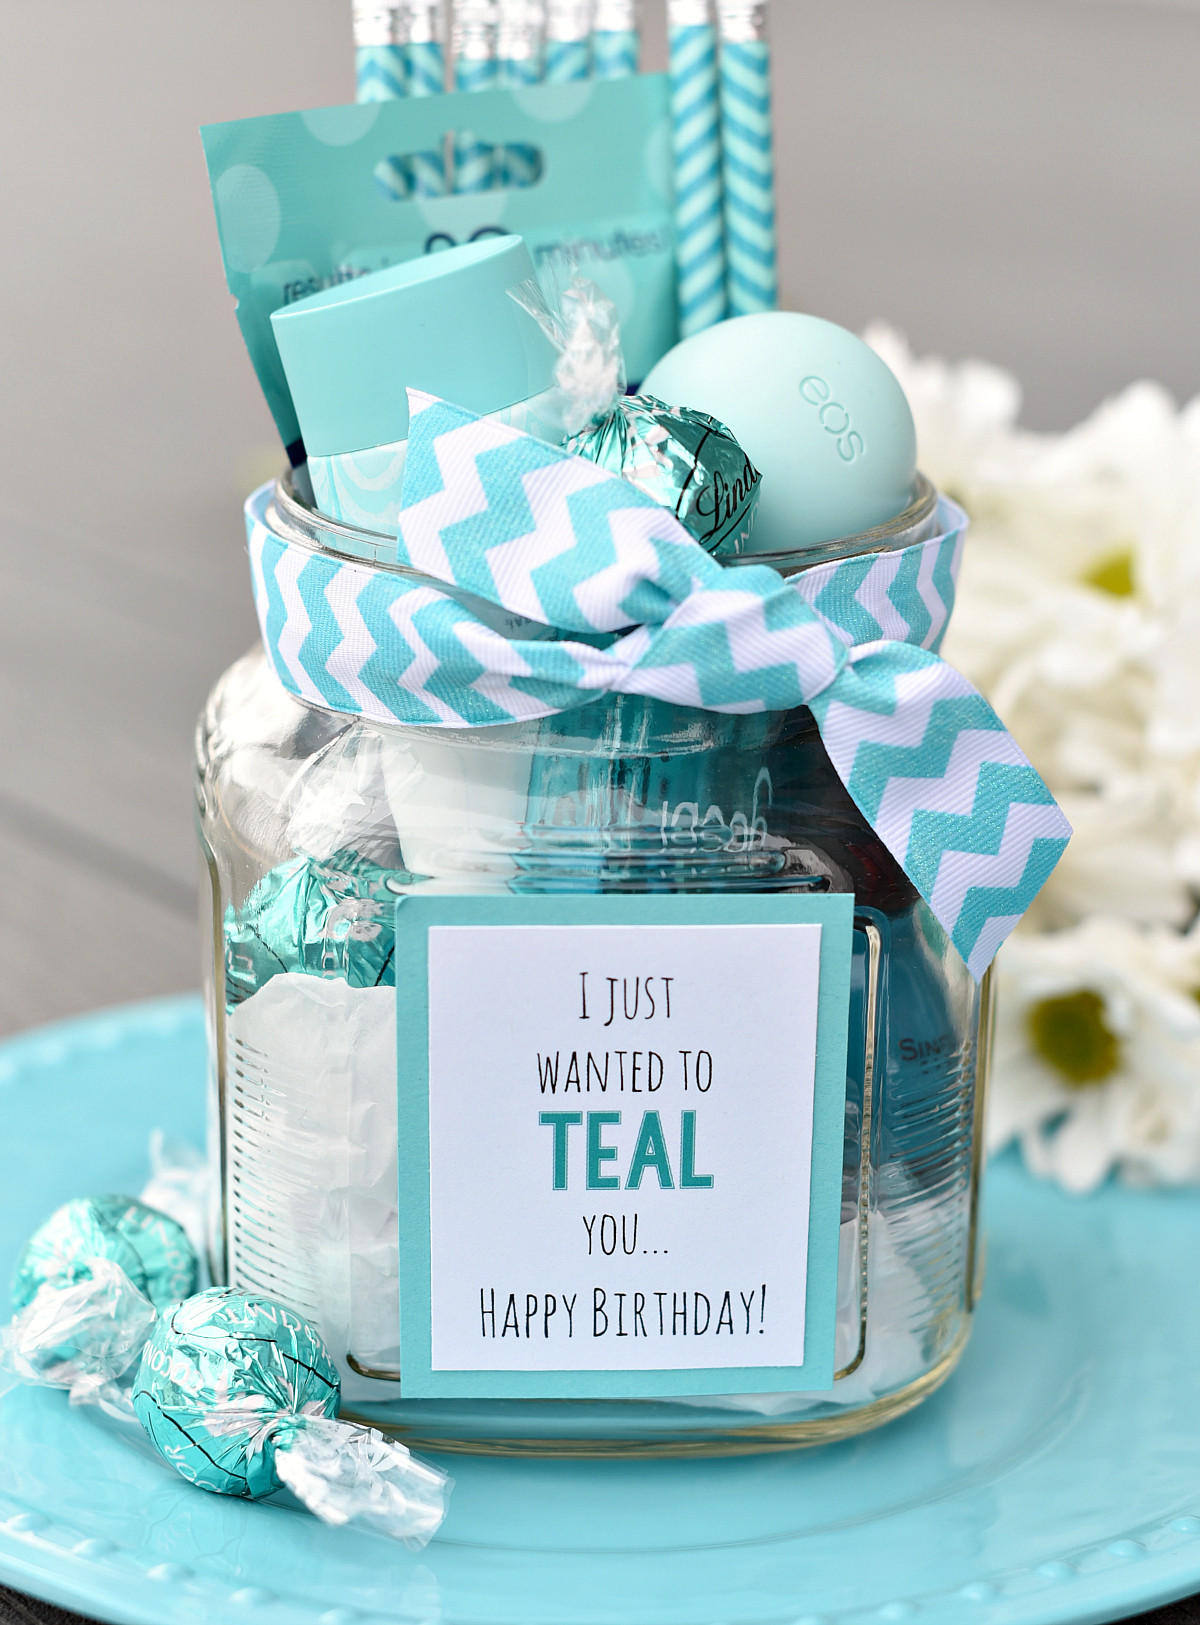 Best Friend Gift Ideas
 Teal Birthday Gift Idea for Friends – Fun Squared